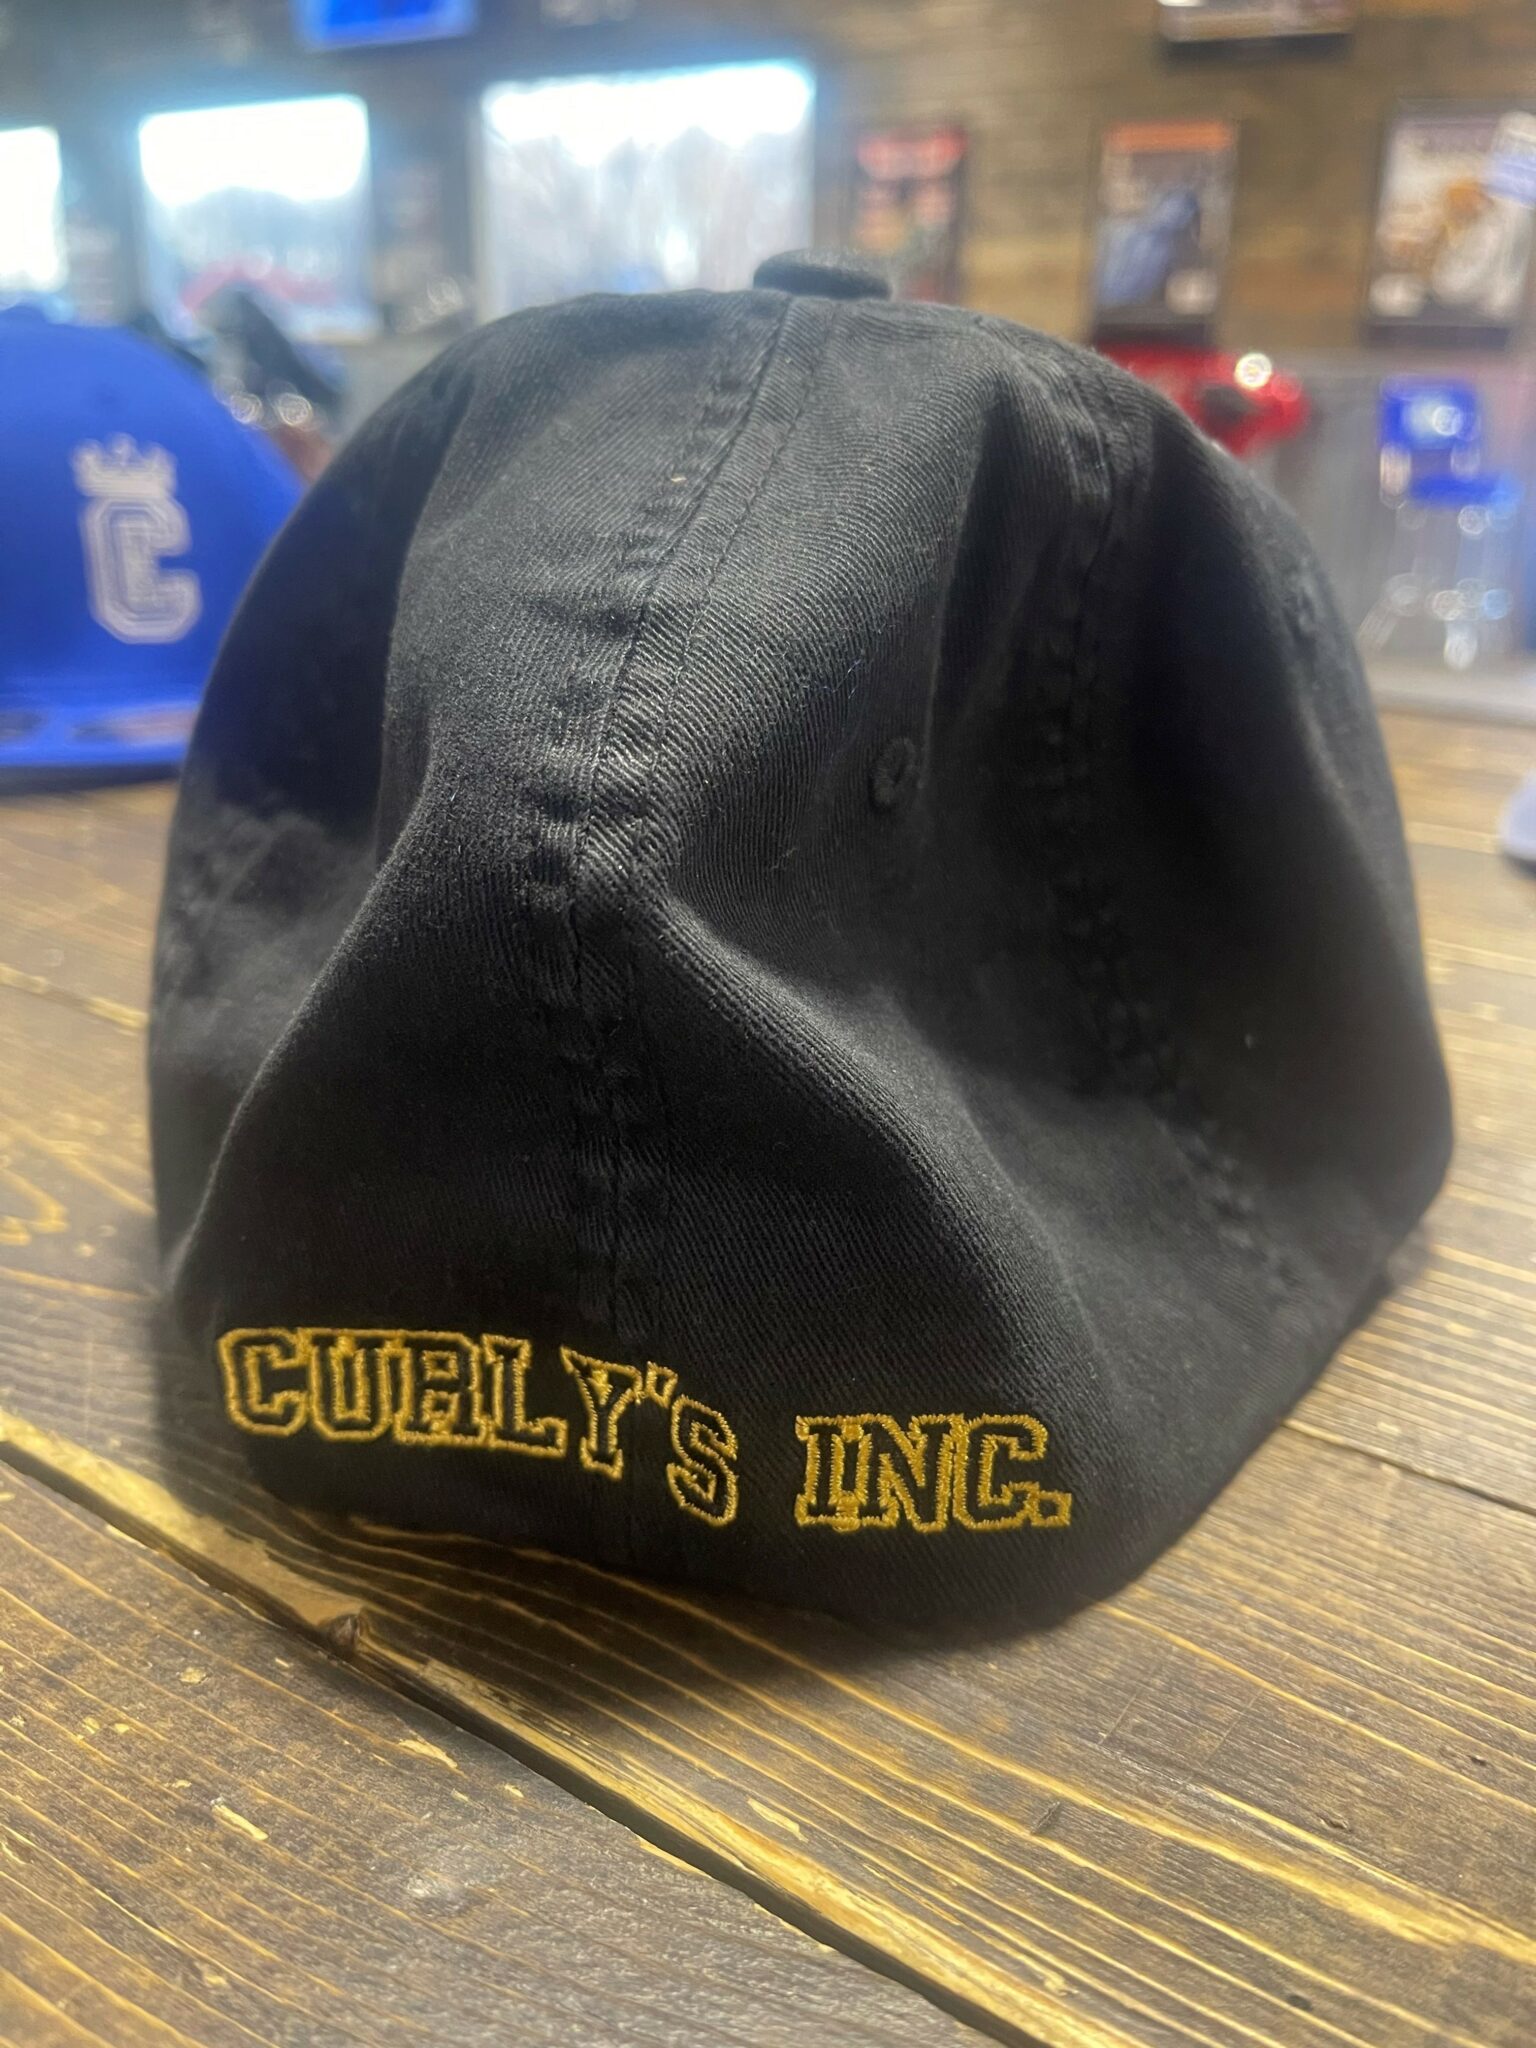 Curly's Inc New Logo Hats - Curly's